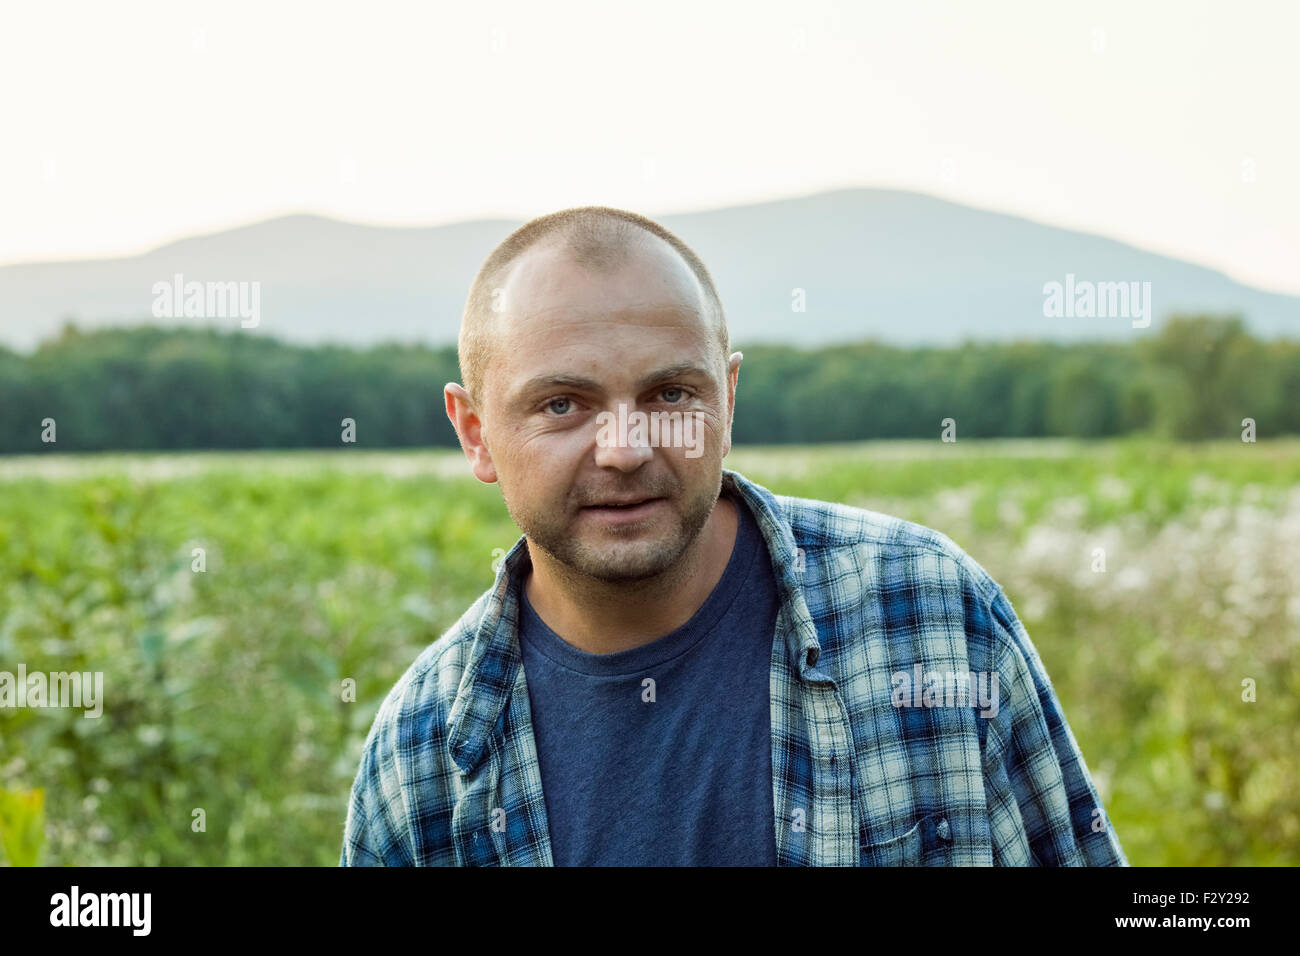 A man outdoors in a wild flower meadow wearing a checked shirt. Stock Photo